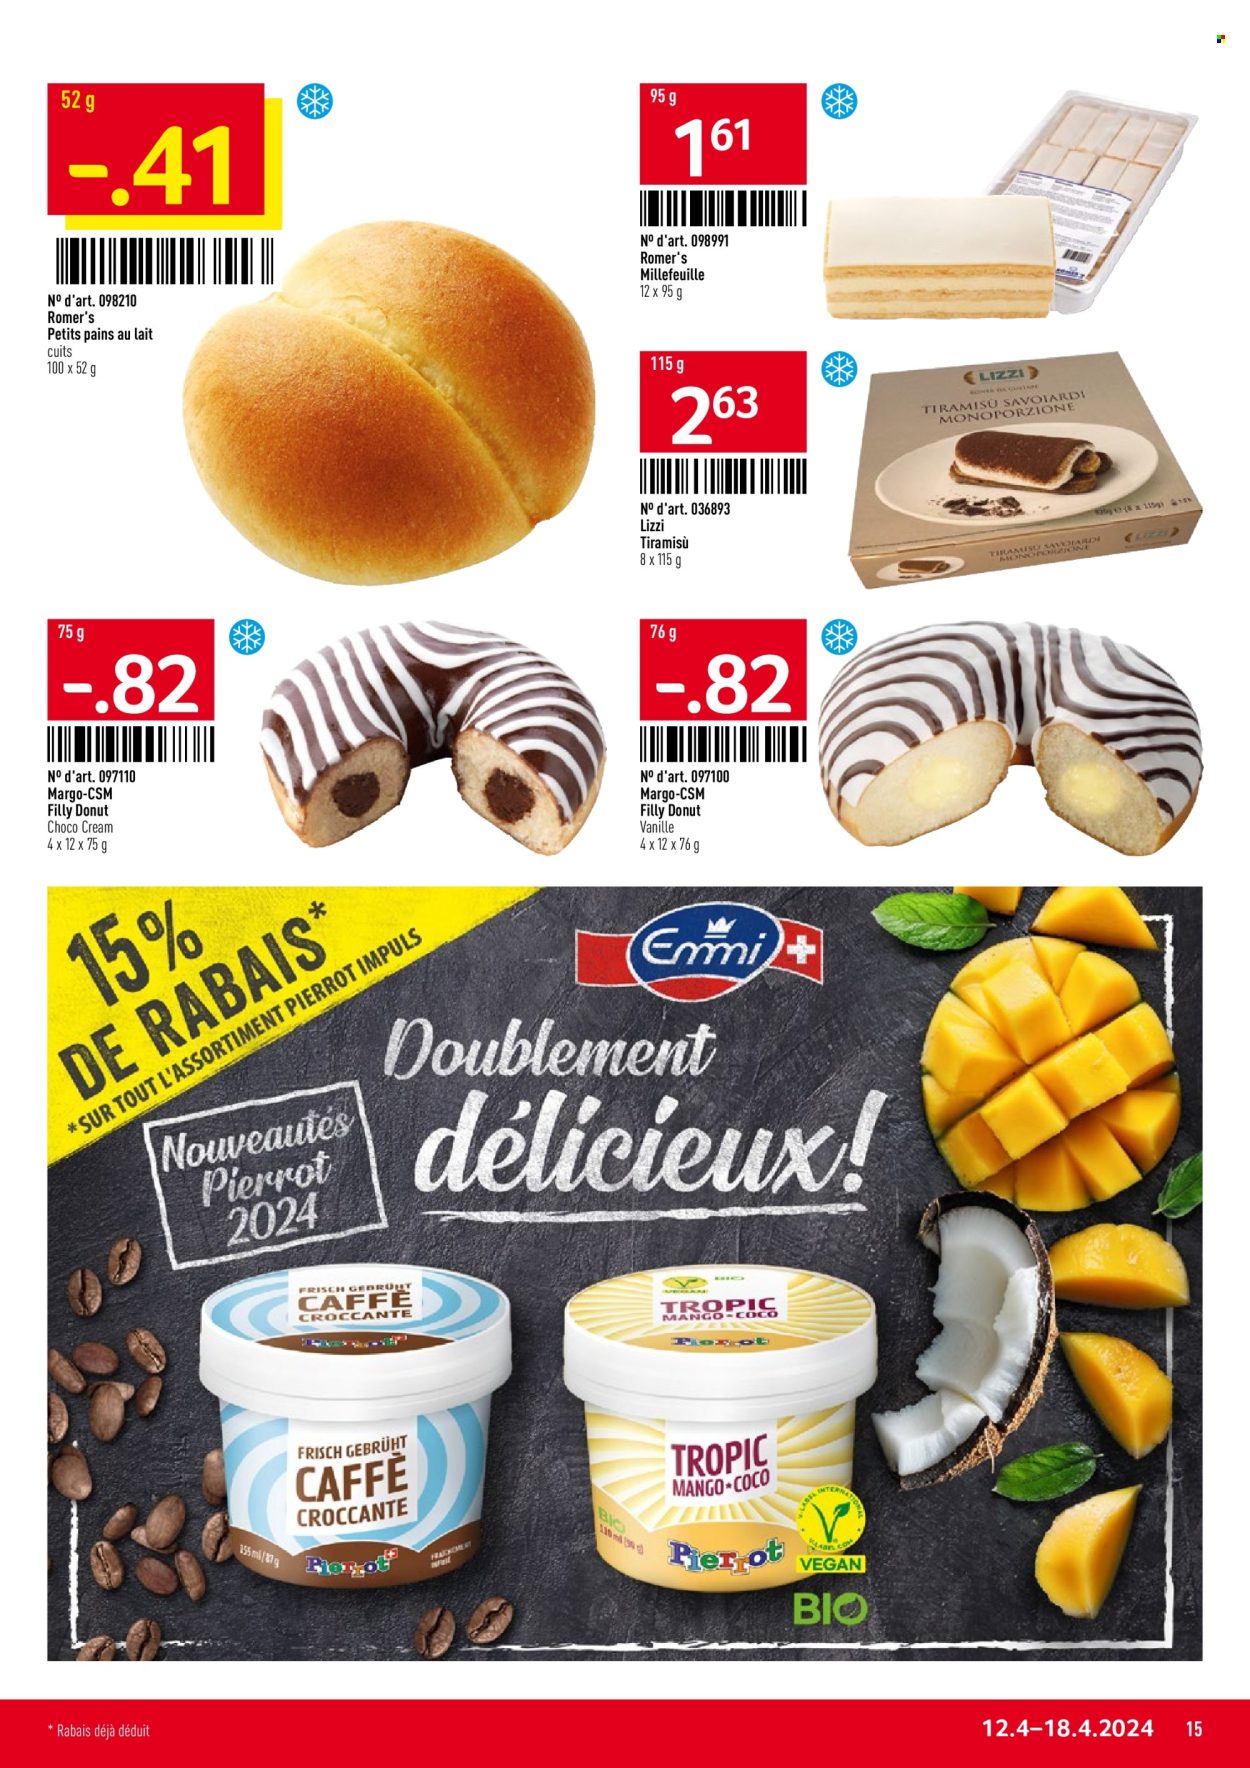 Catalogue TransGourmet - 12.4.2024 - 18.4.2024. Page 15.